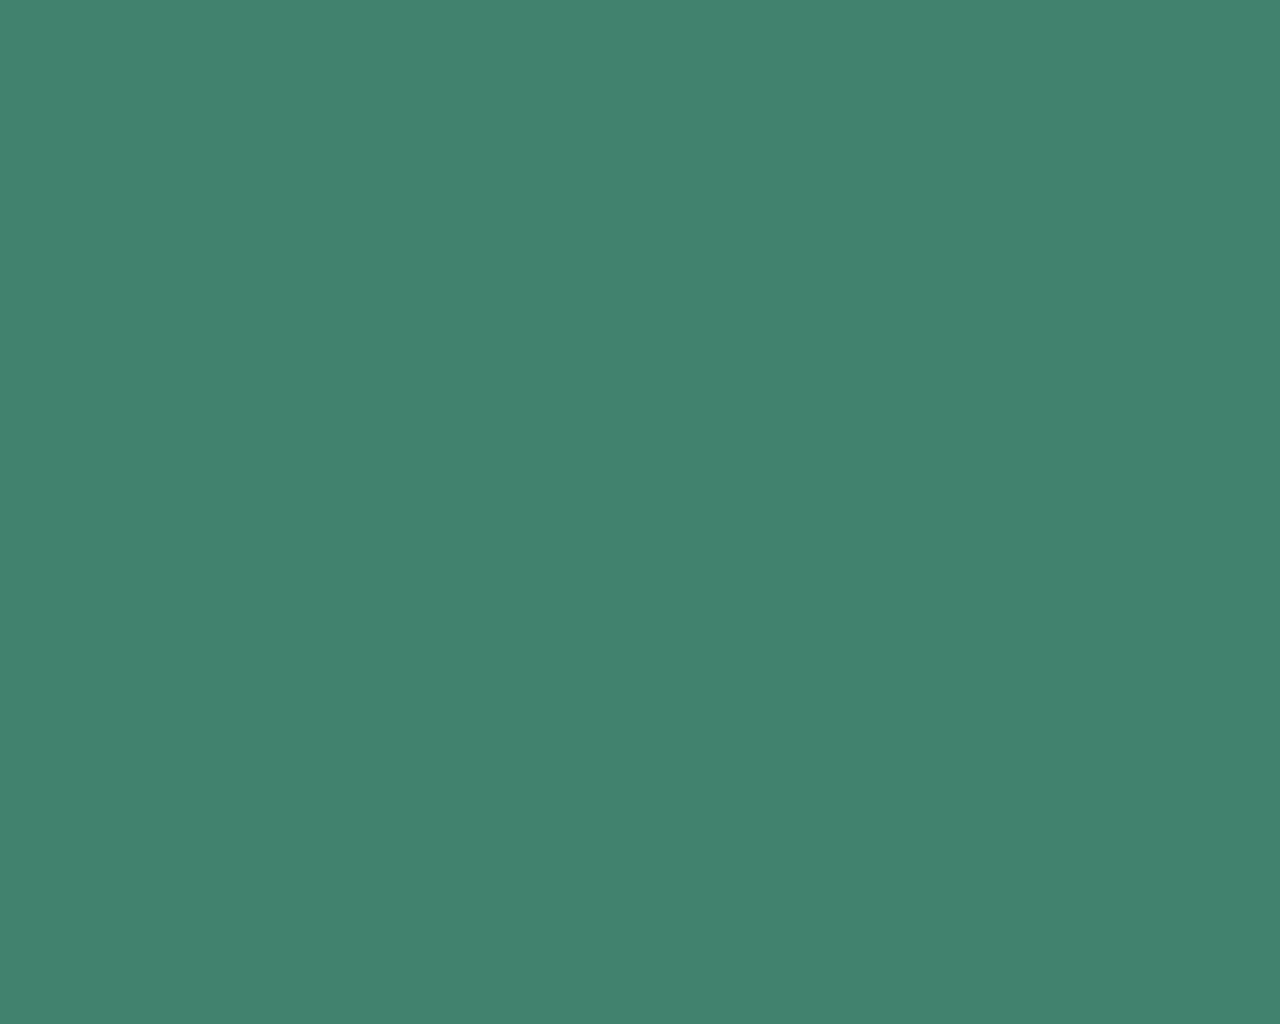 1280x1024 Viridian Solid Color Background